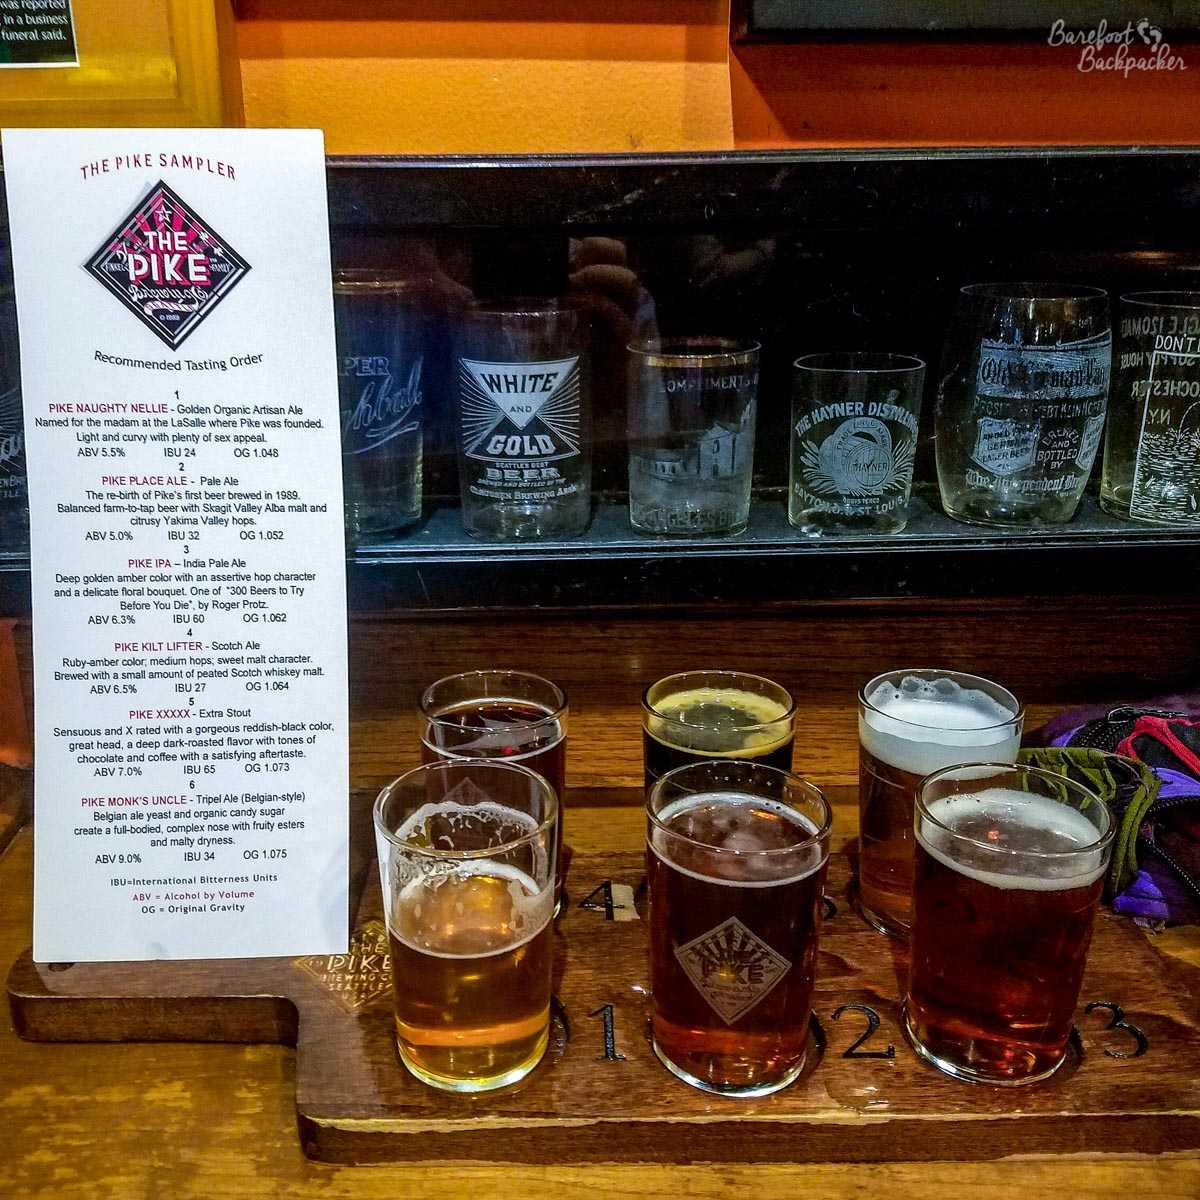 Flight of beers at Pike Place Brewery, Seattle WA